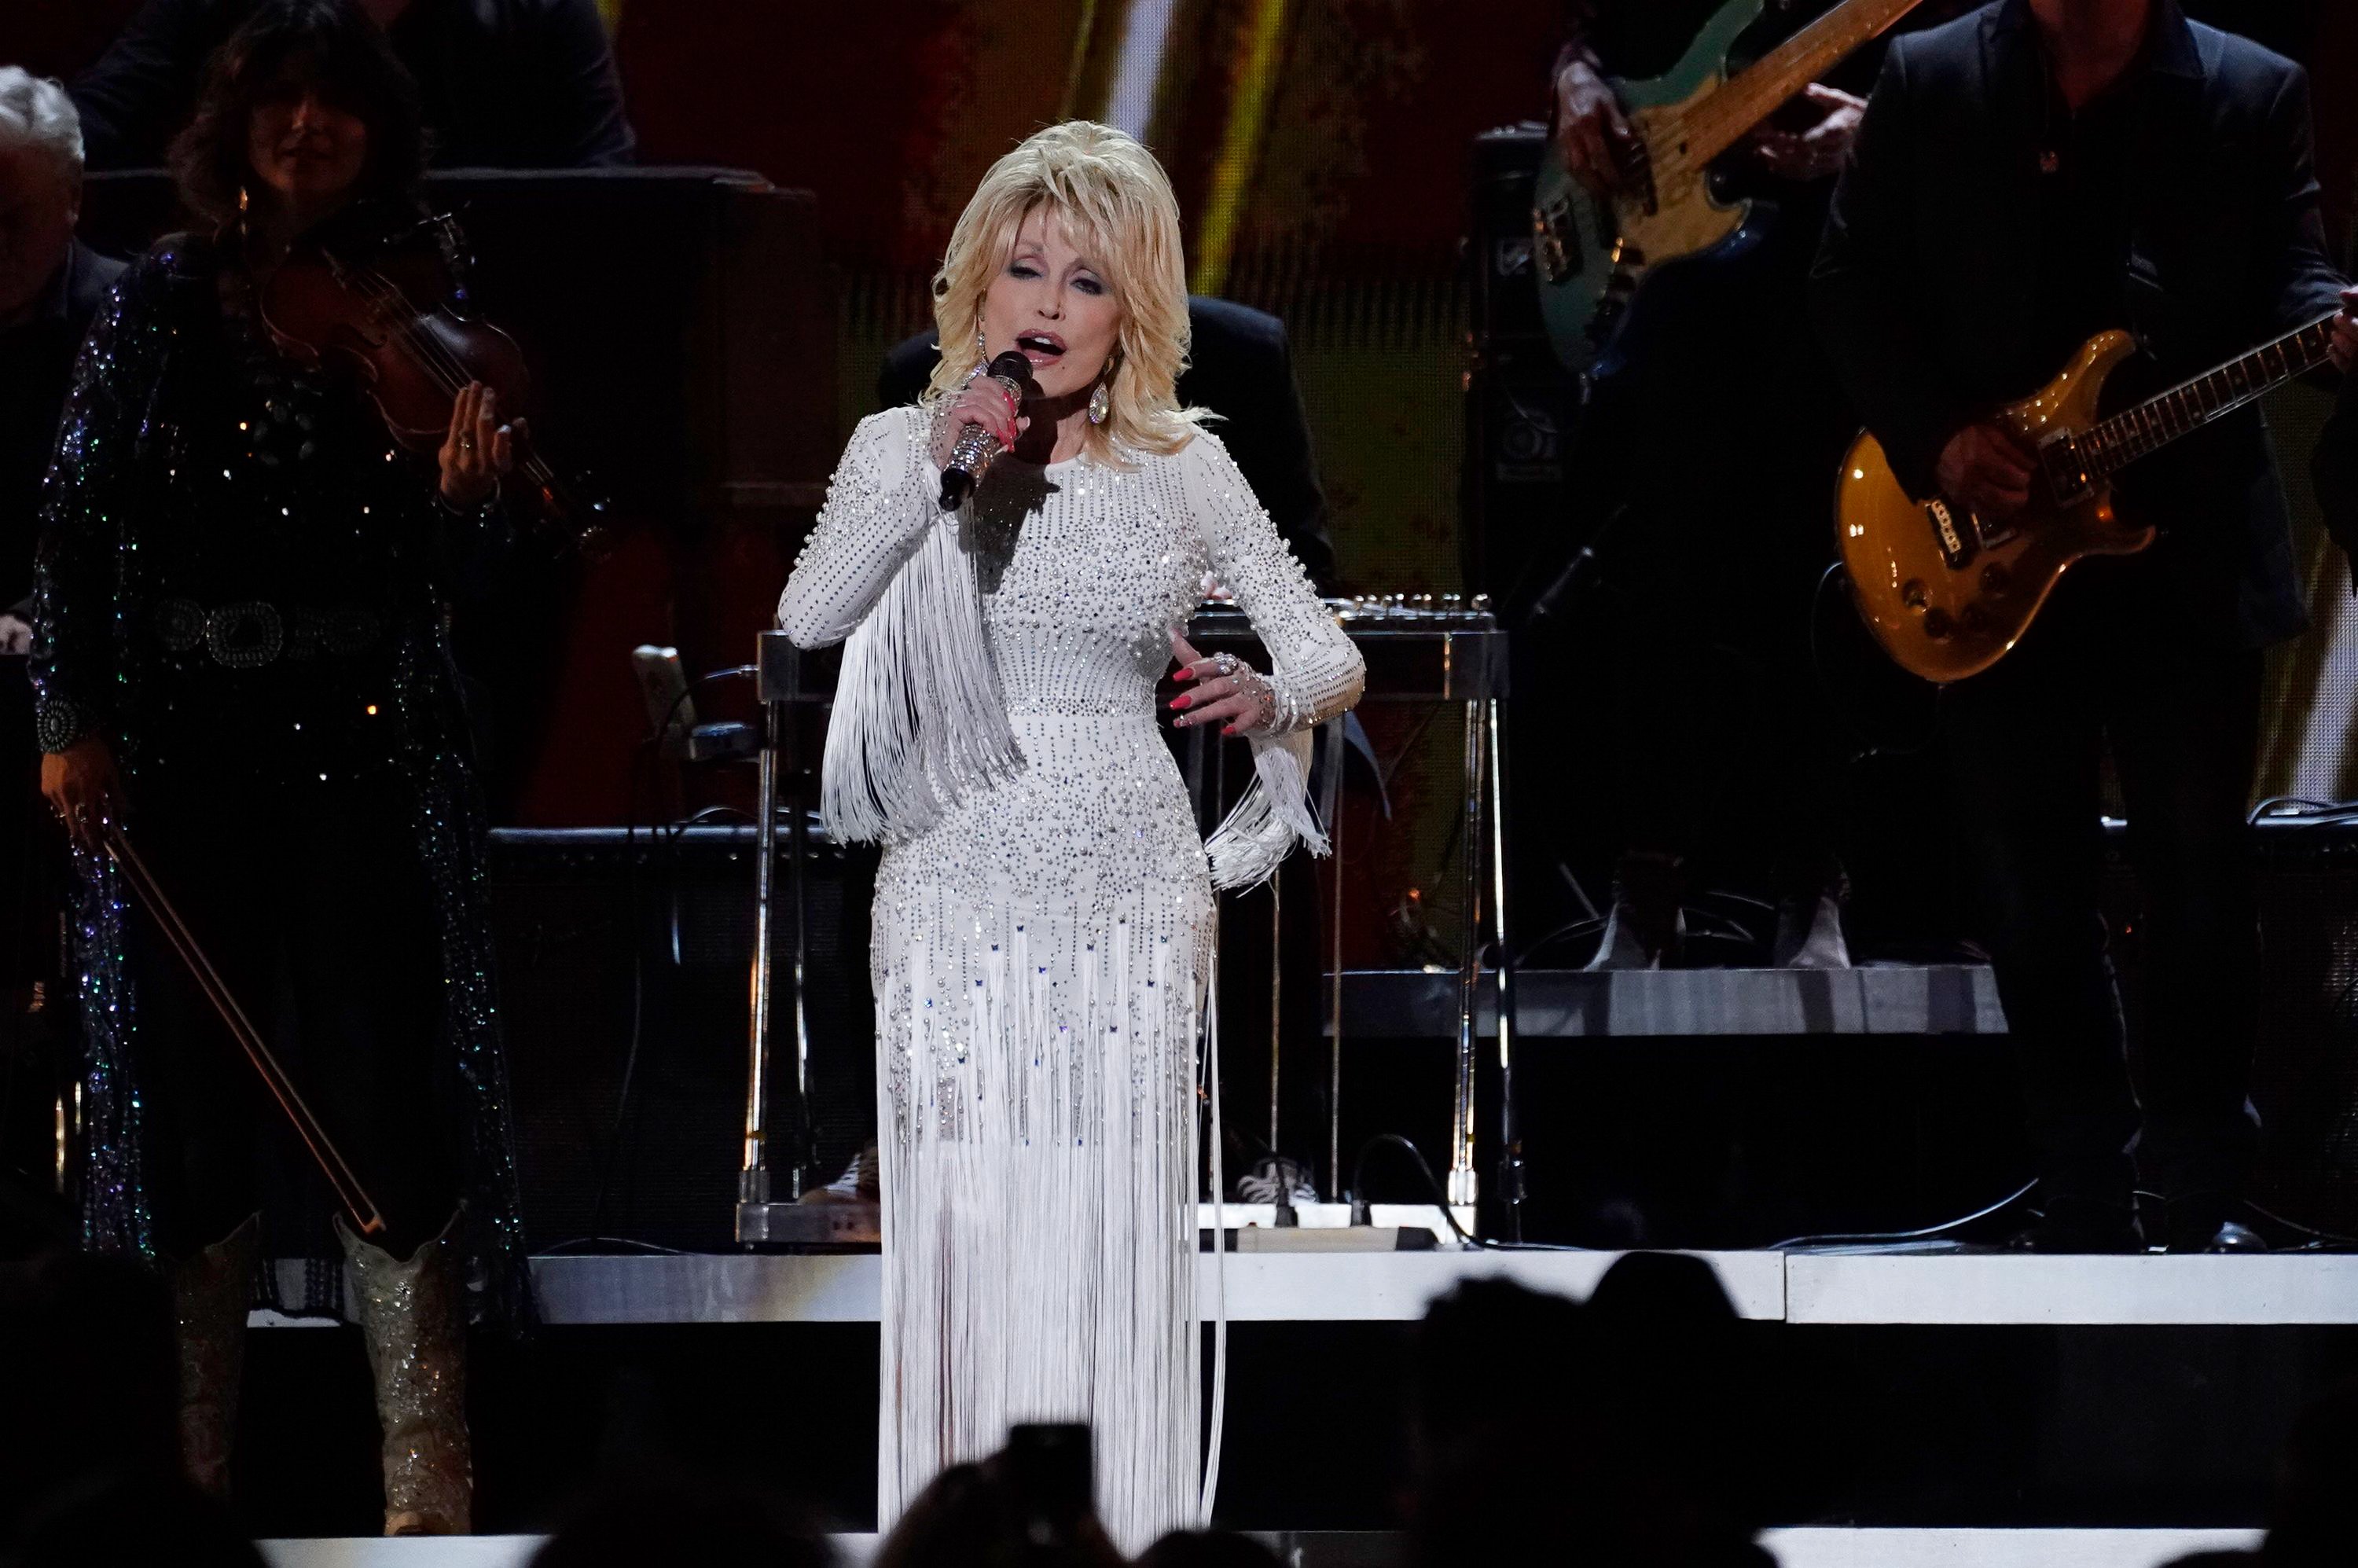 Dolly Parton singing on stage. She's in an all-white fringe dress.